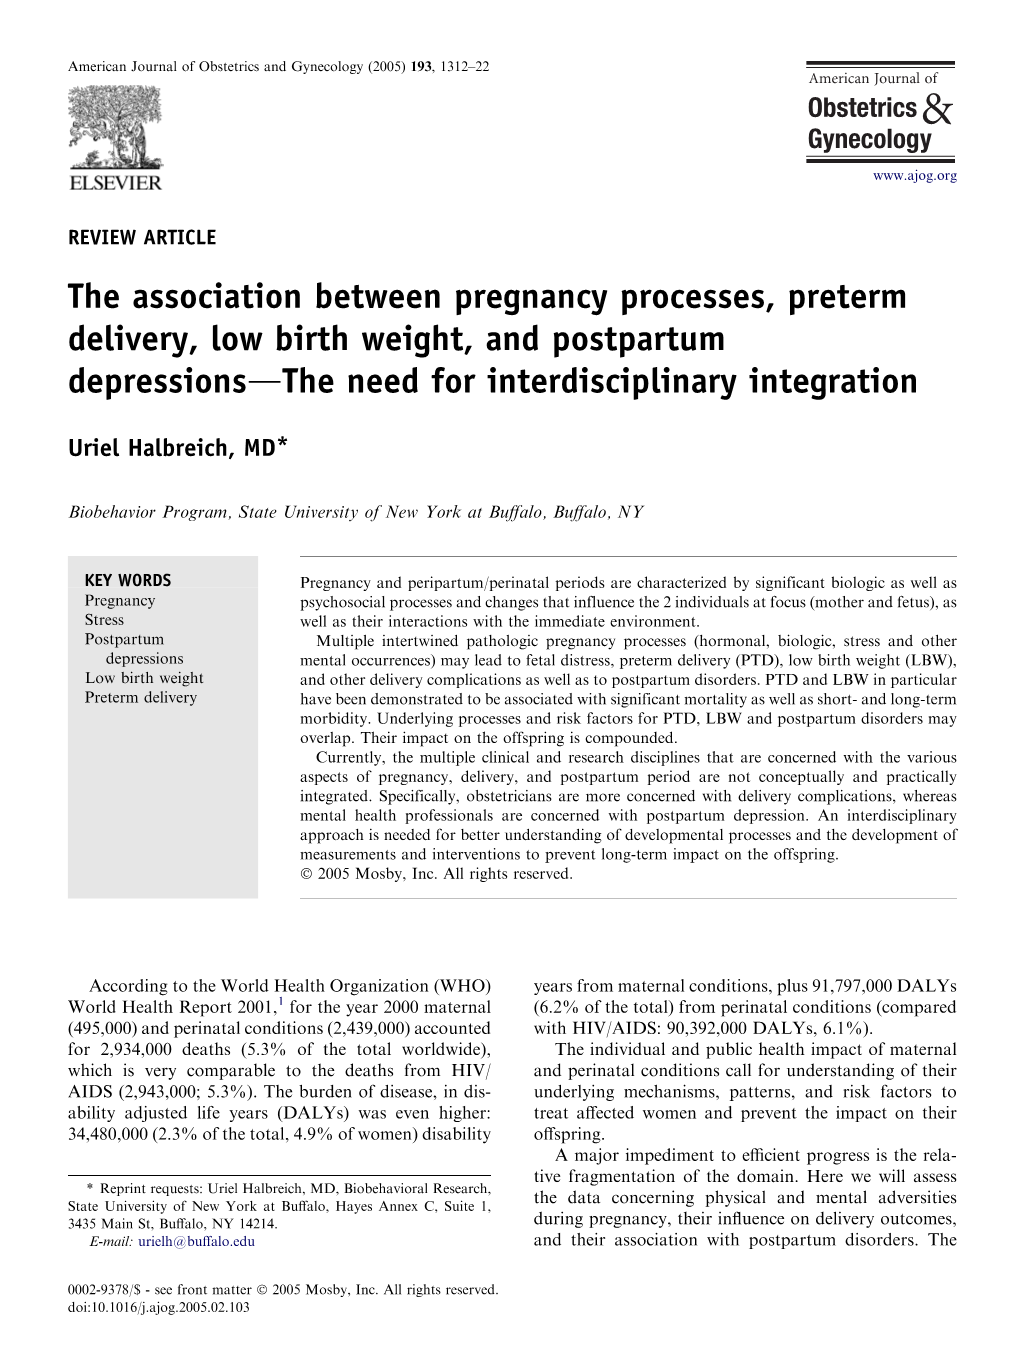 The Association Between Pregnancy Processes, Preterm Delivery, Low Birth Weight, and Postpartum Depressionsdthe Need for Interdisciplinary Integration